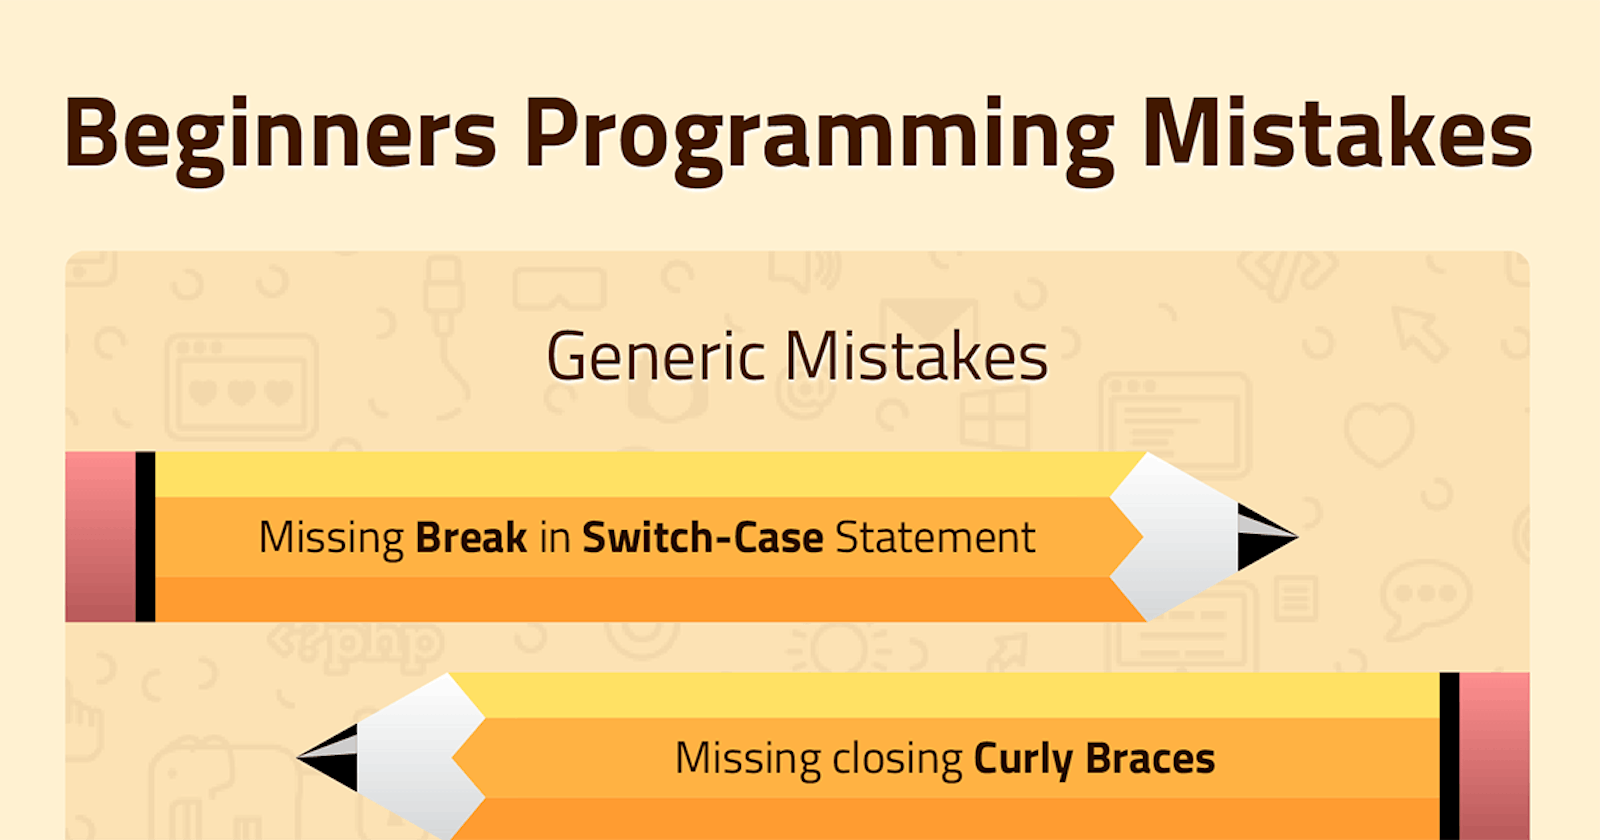 15 Common Coding Mistakes by Beginners - Ananya Chatterjee